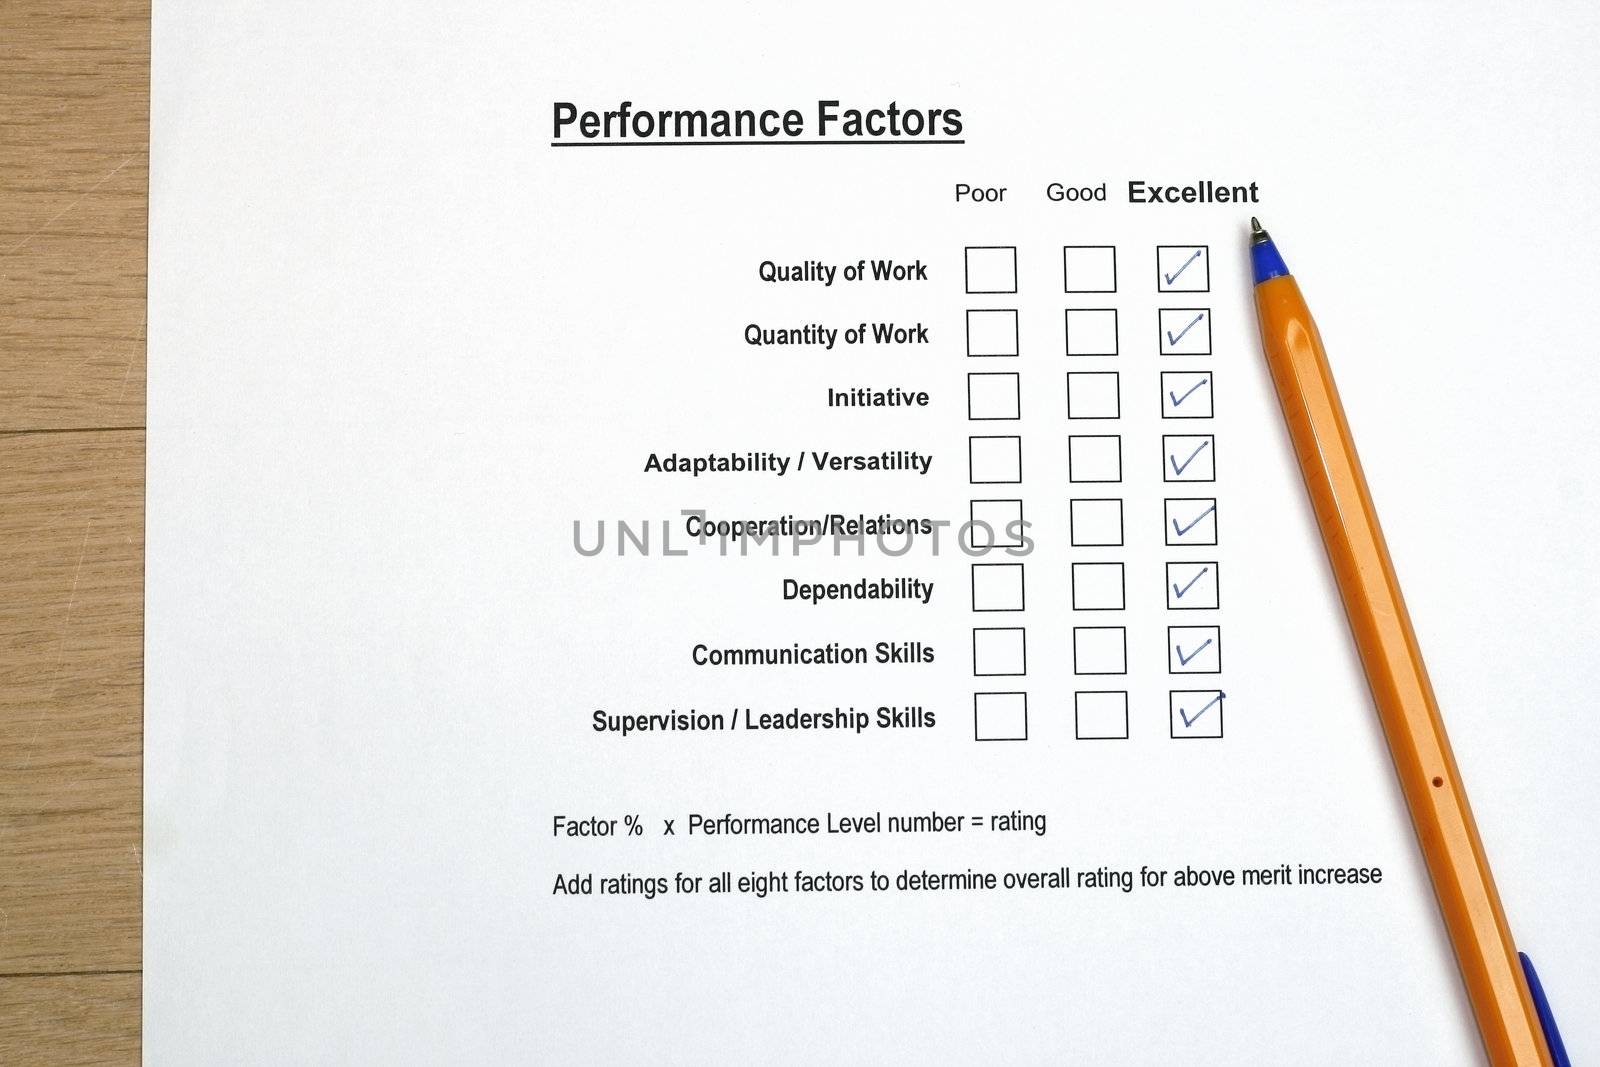 Performance evaluation survey concept - many uses for human resources evualtion for merit increase or promotion.